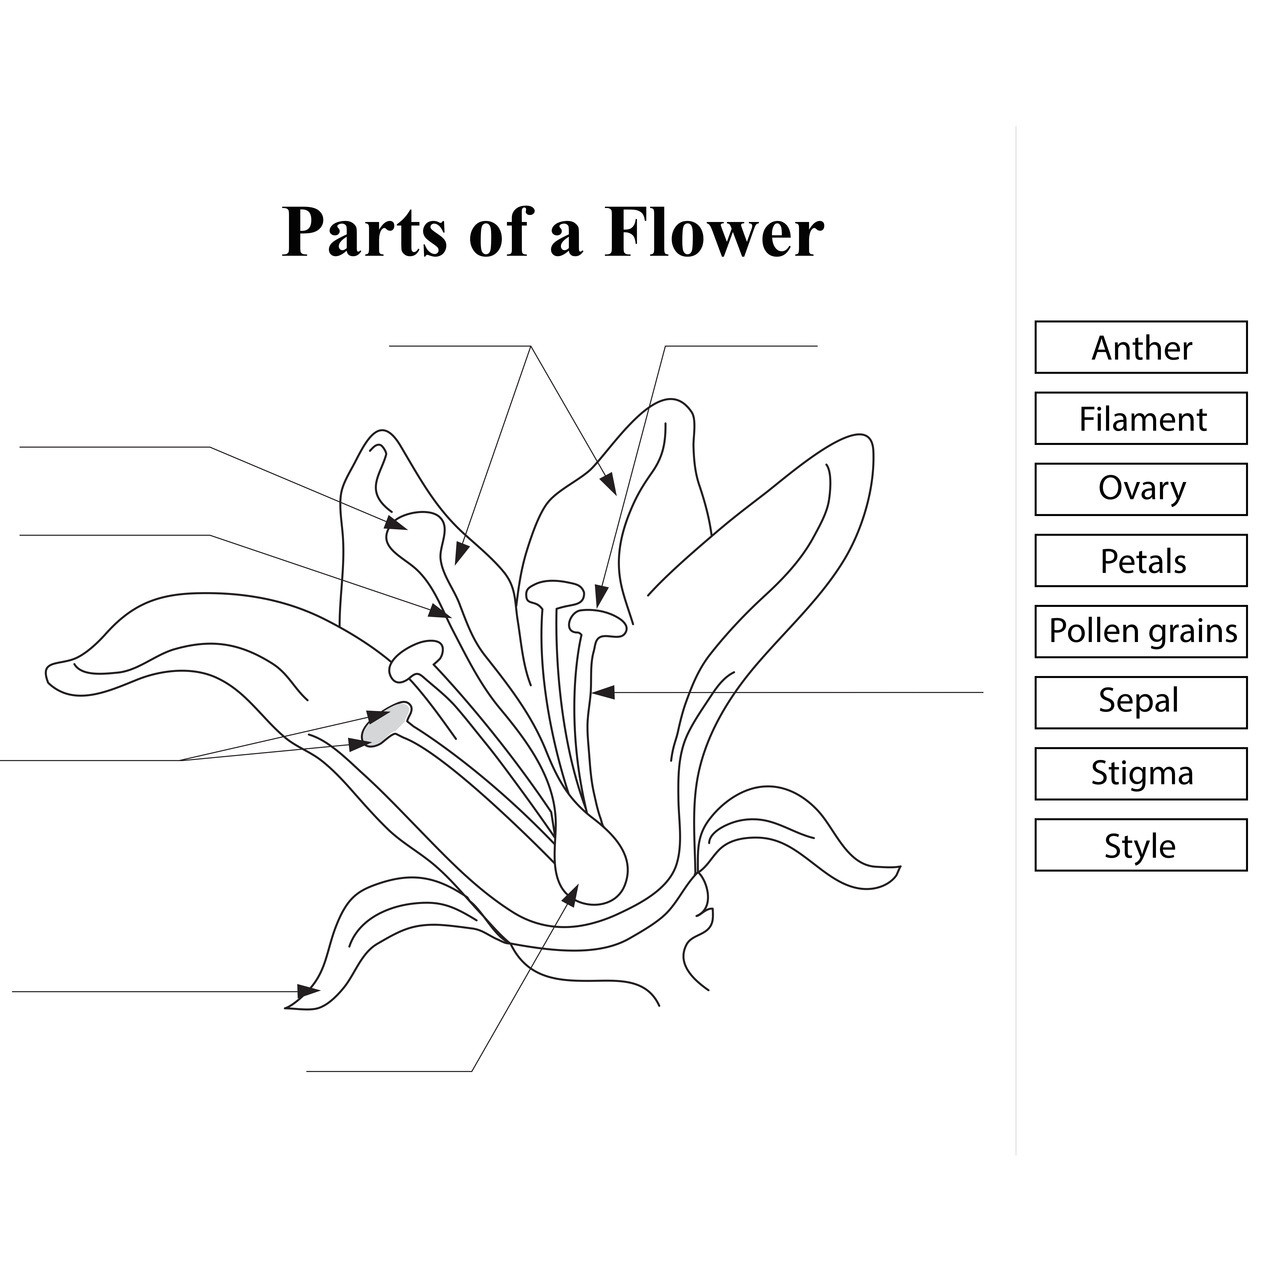 14-best-images-of-plant-worksheets-for-grade-1-printable-plant-parts